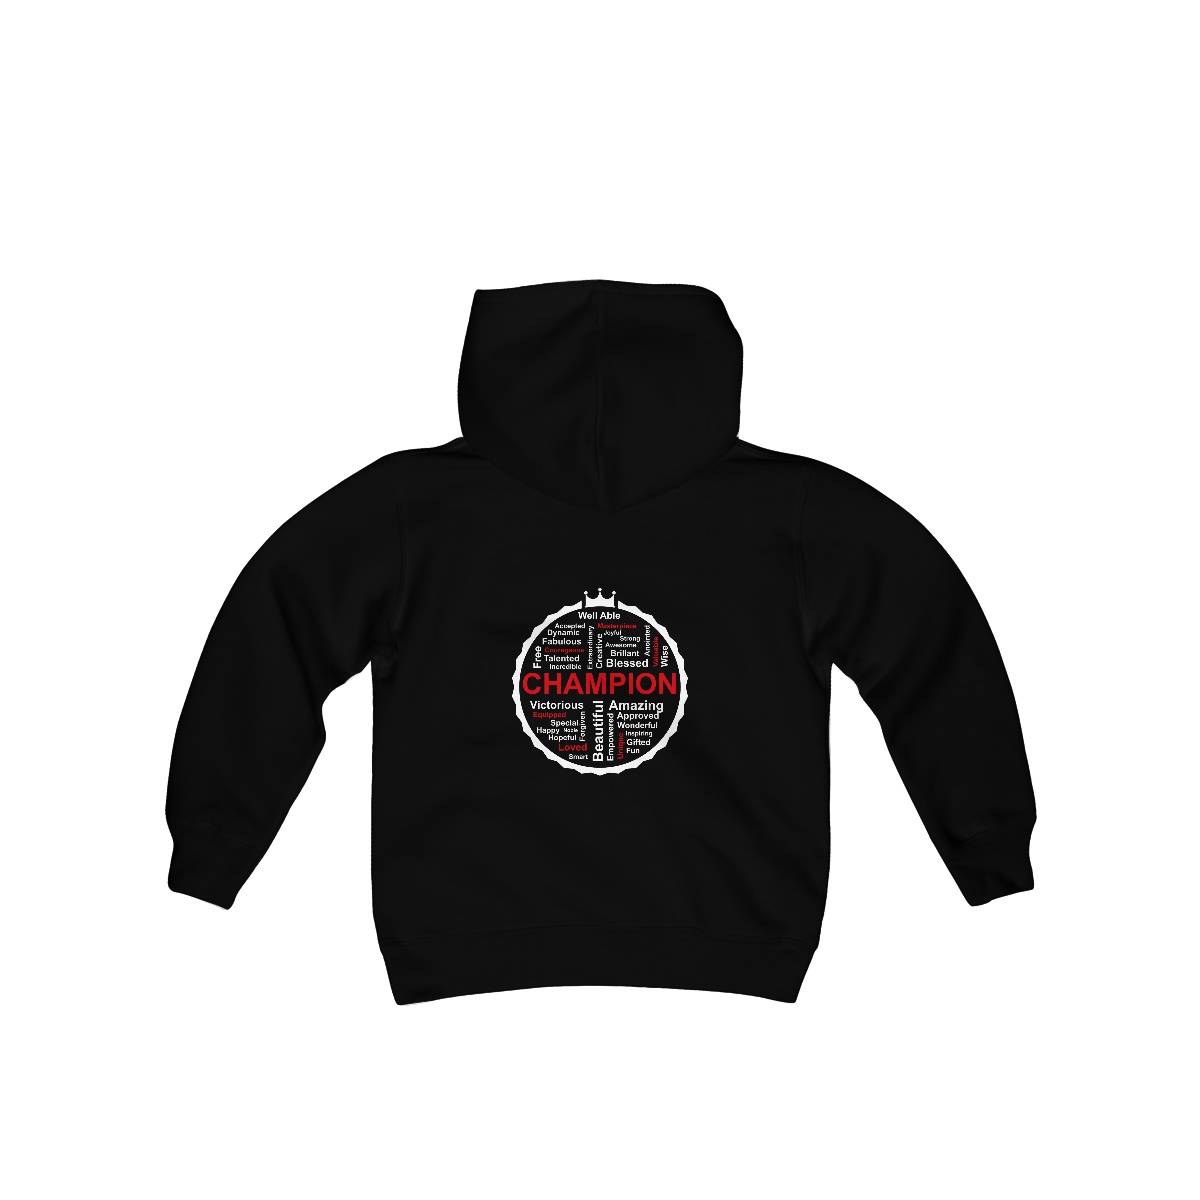 CHAMPION Kids Hoodie - Special Club Needs Ministry Champions